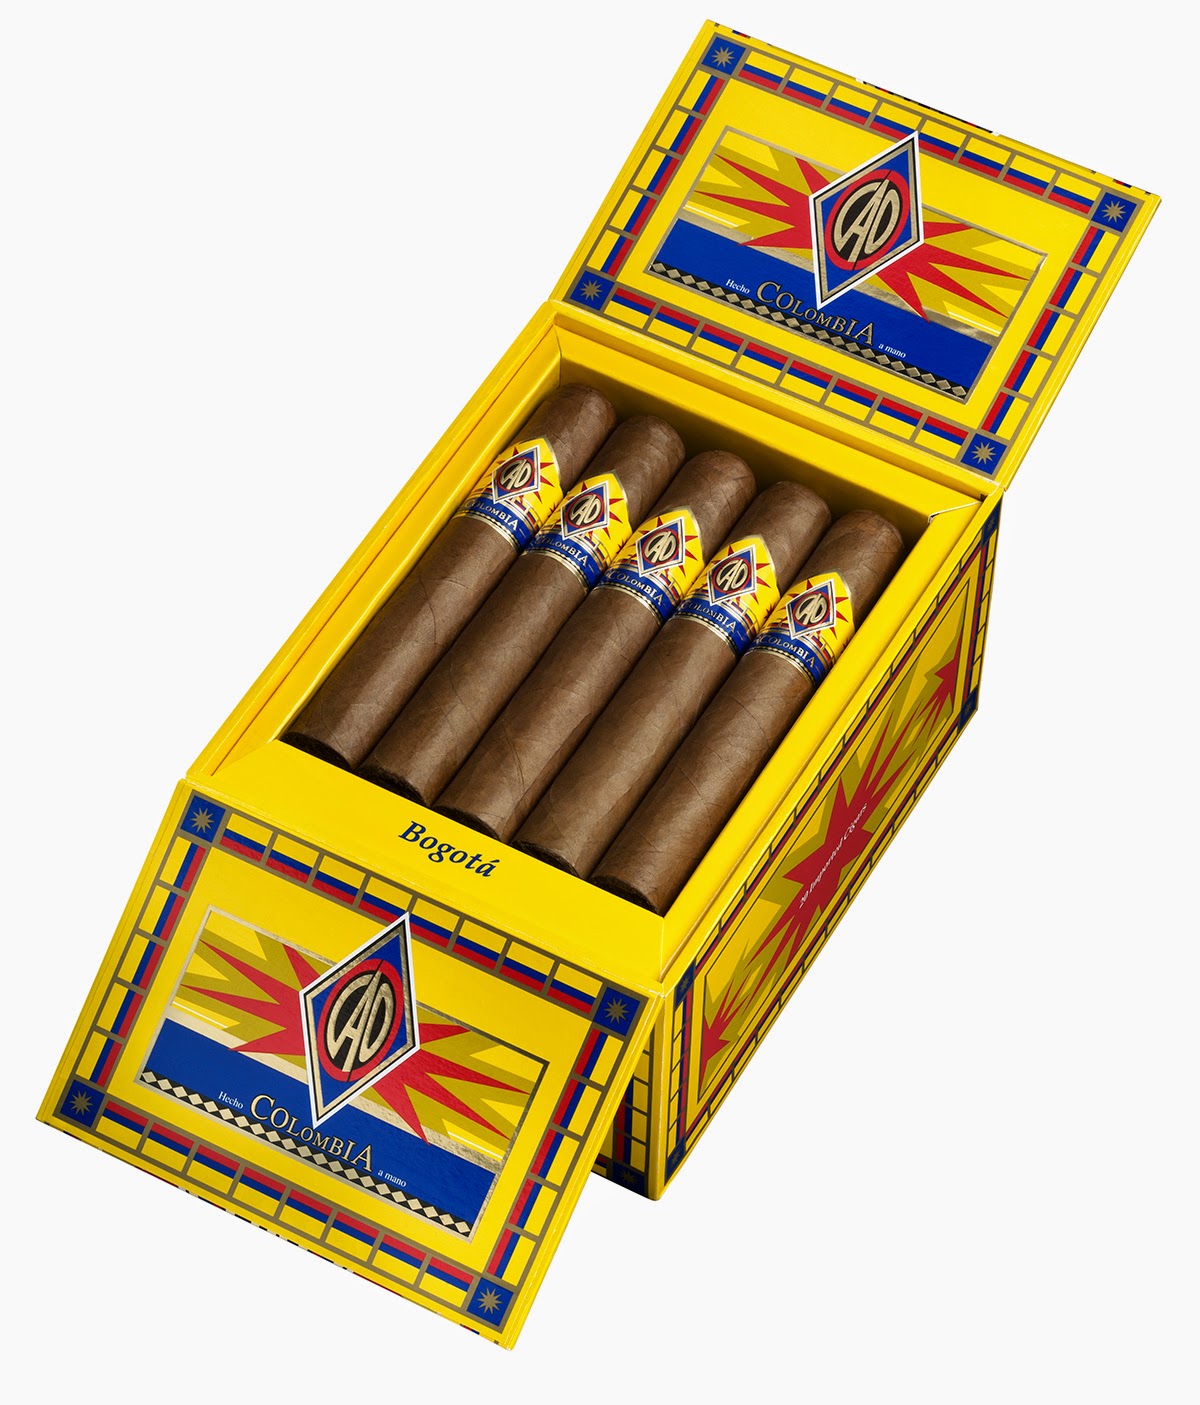 CAO Colombia